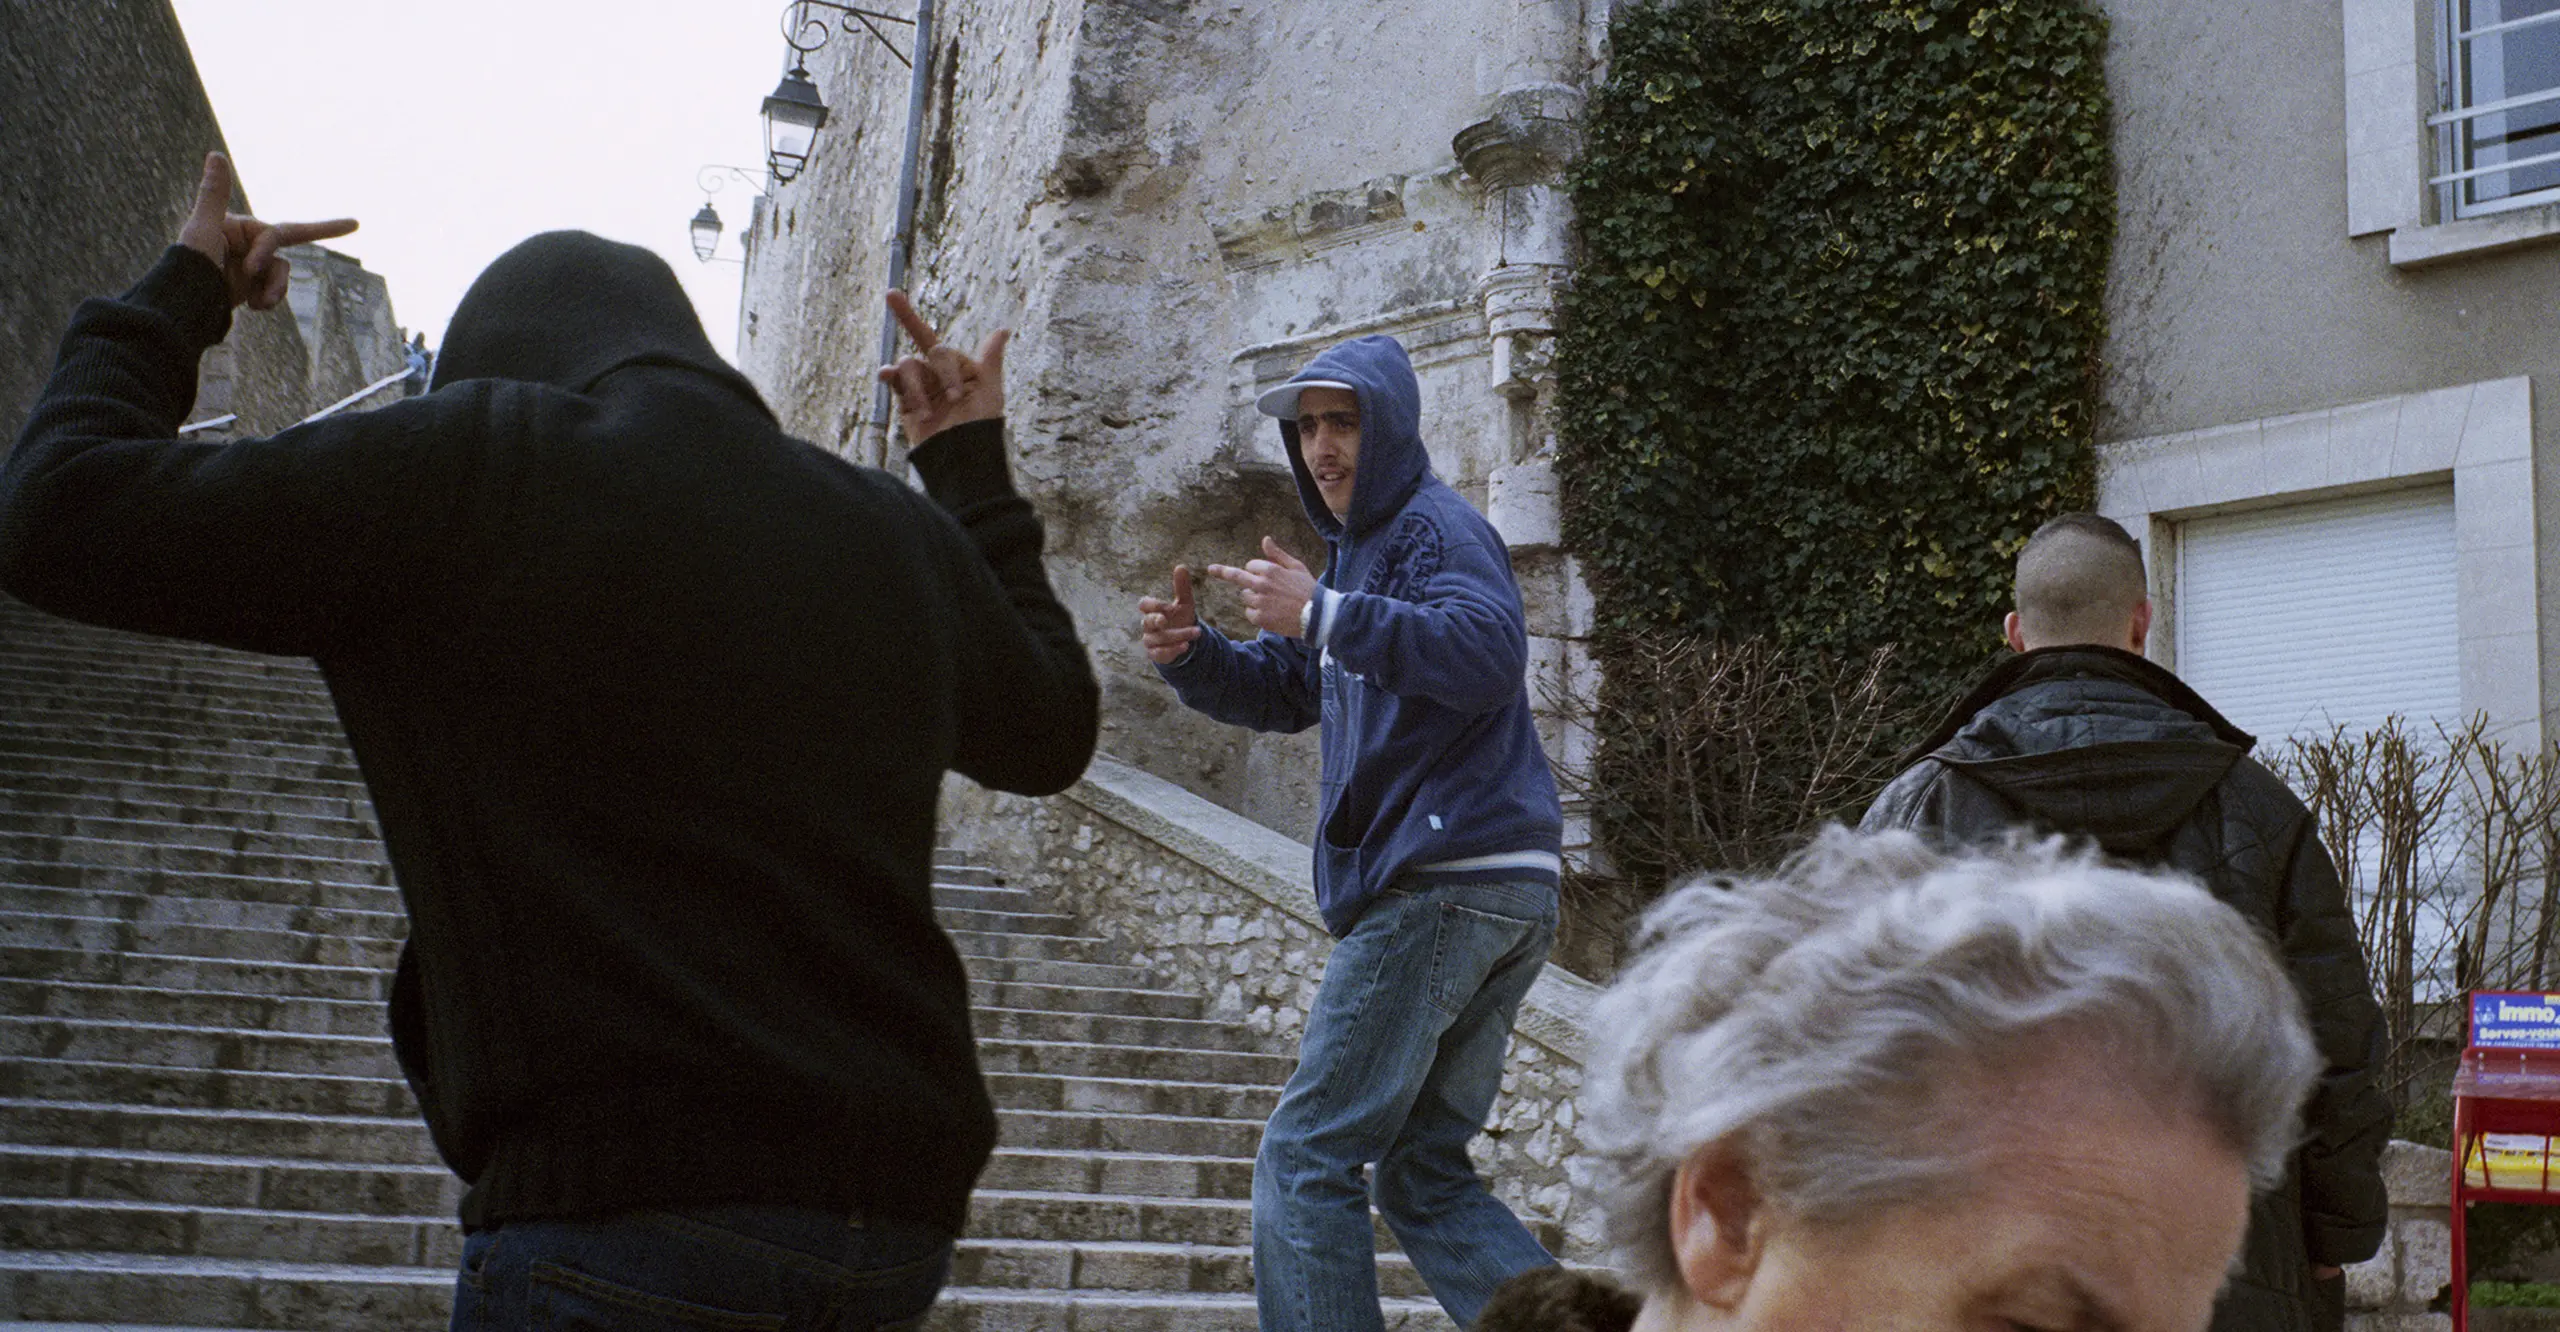 young pople walking up stairs in france town